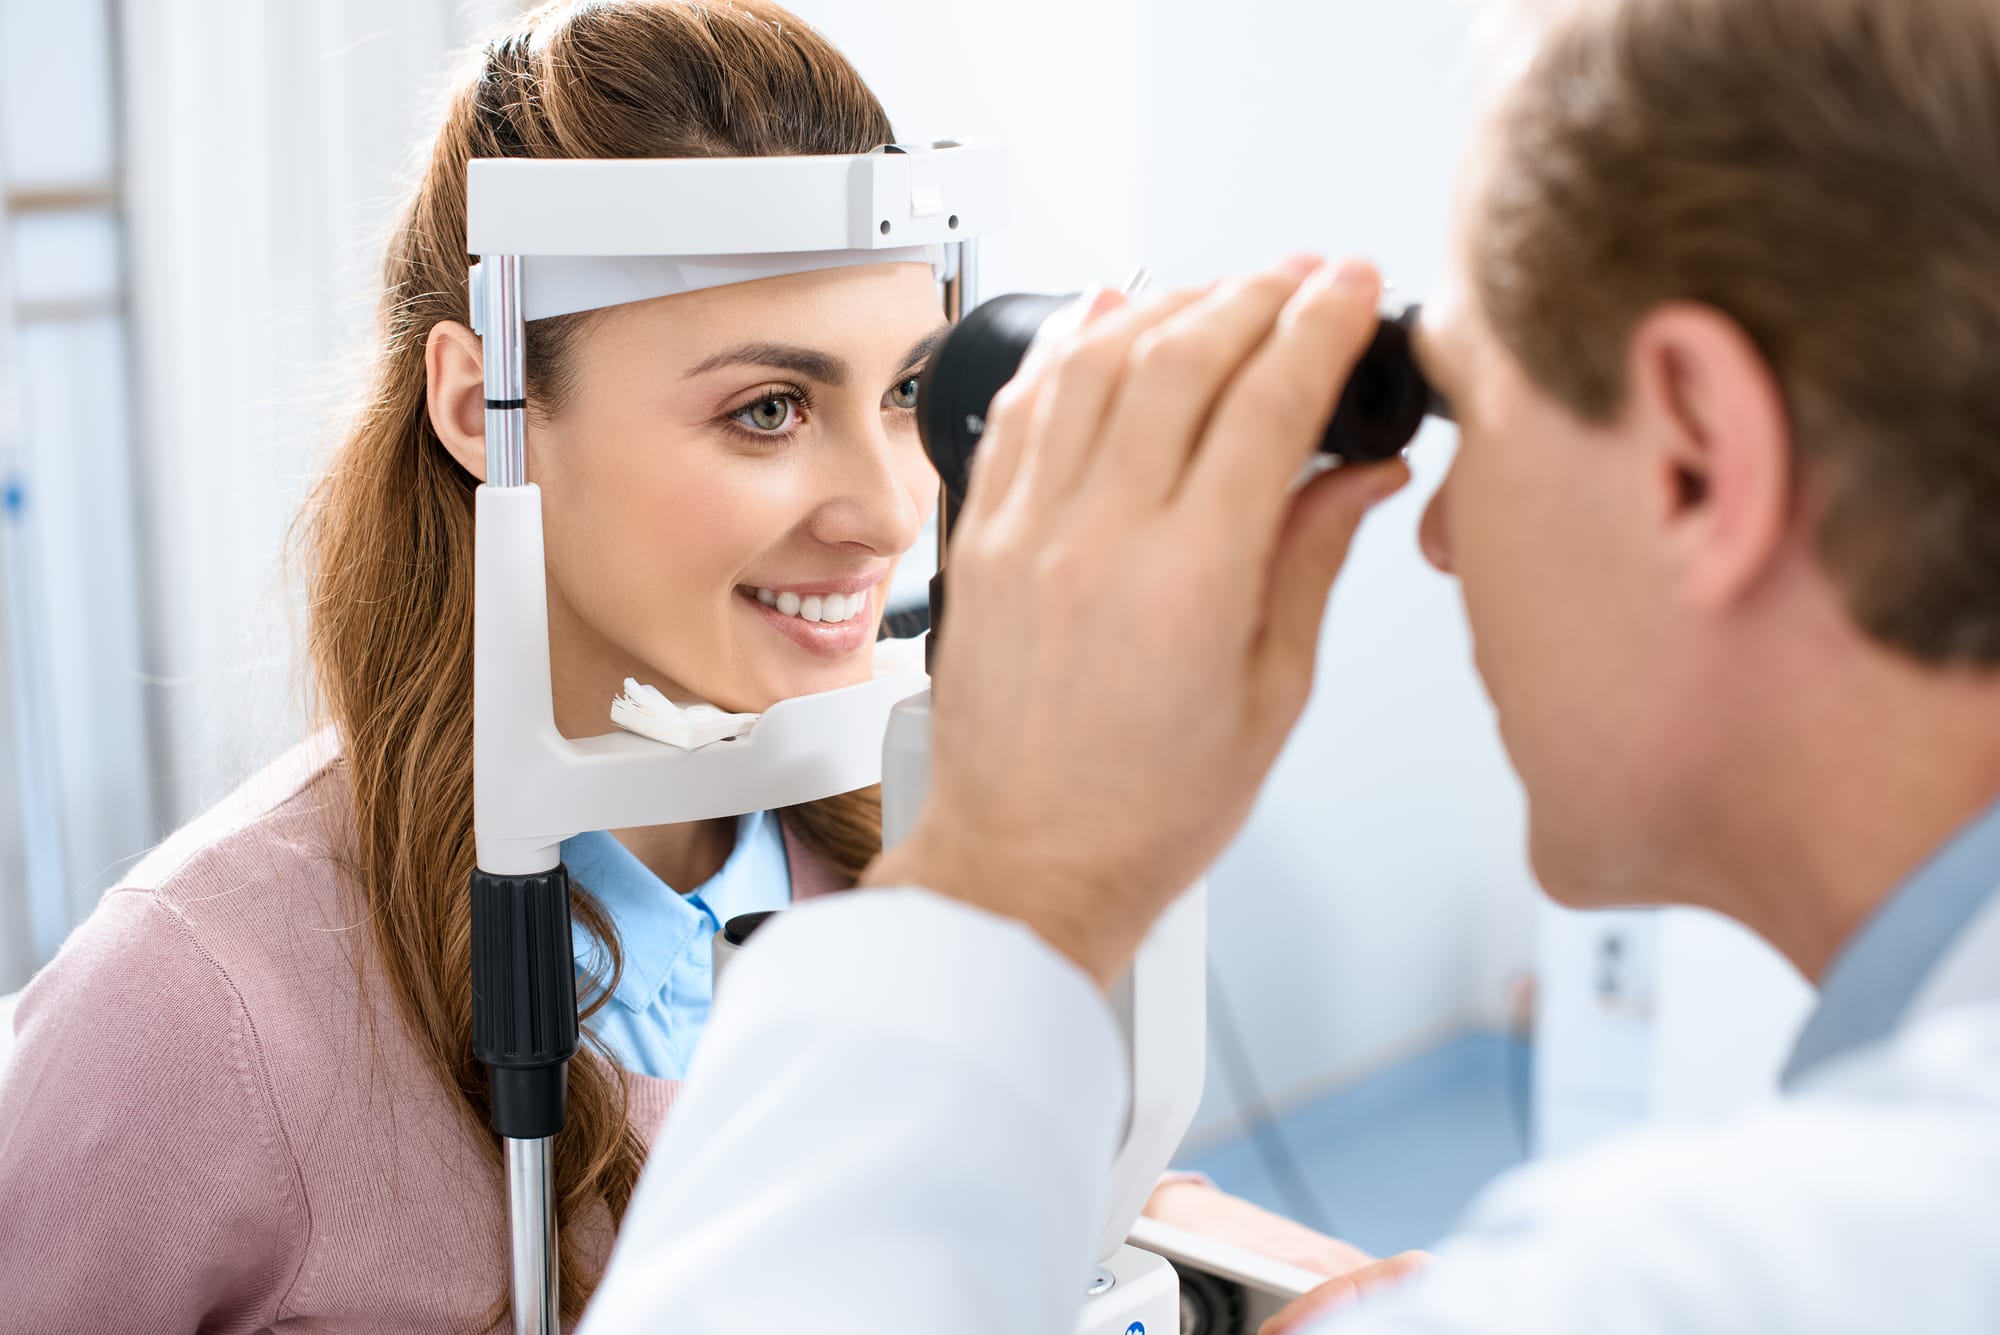 dr-joshua-cohen-discusses-natural-eye-protection-on-the-ophthalmologist-site